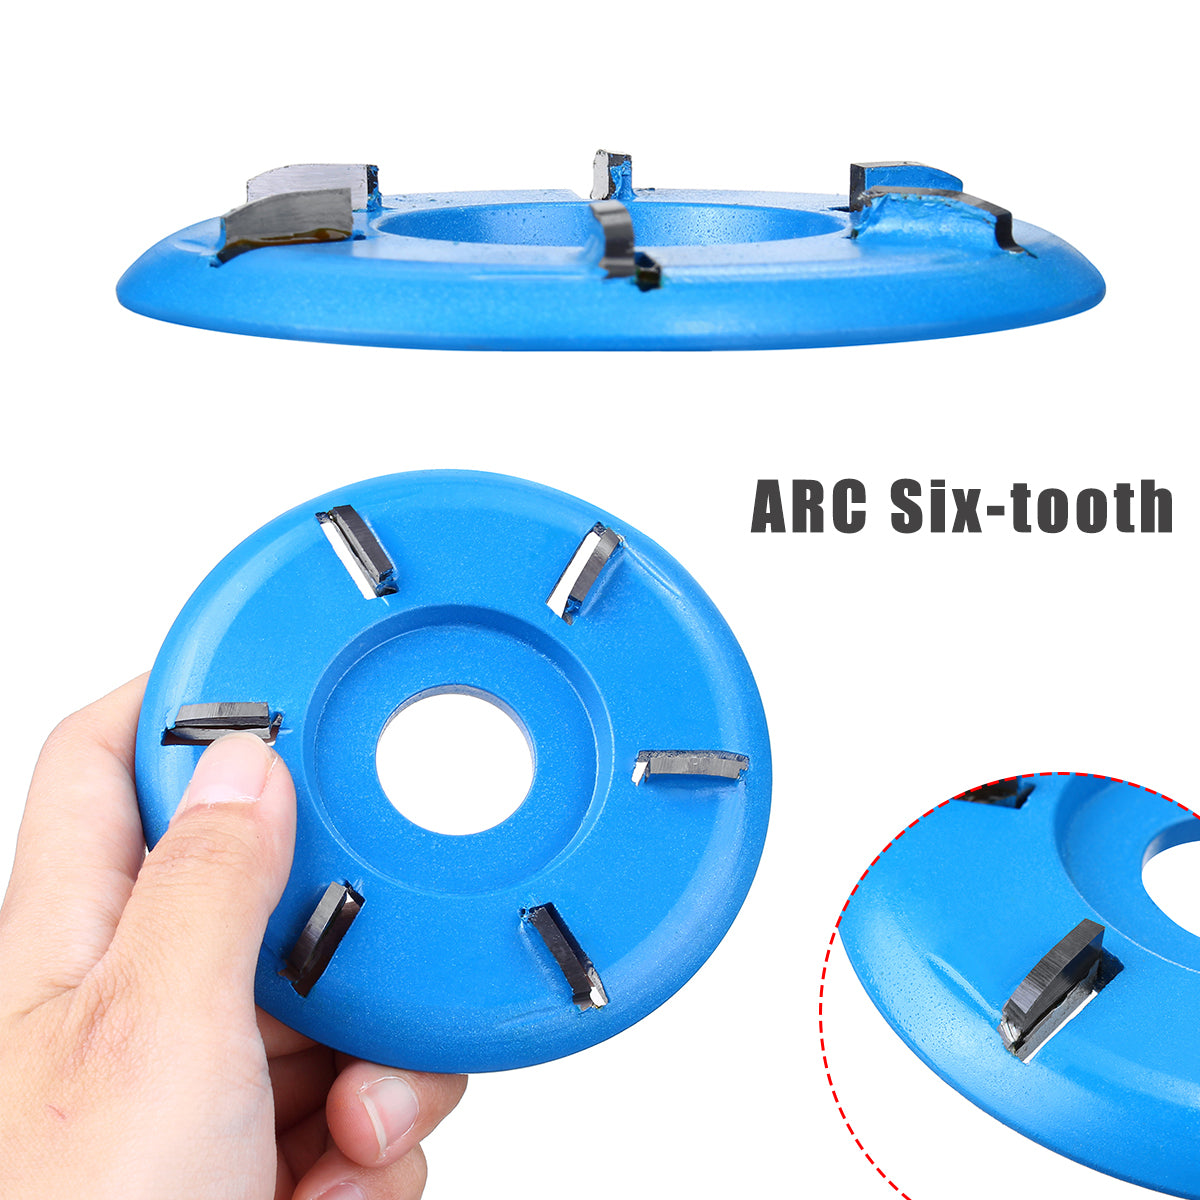 ARC 5-tooth Plane Wood Carving Tool Milling Cutter For 22mm Angle Grinder Woodworking